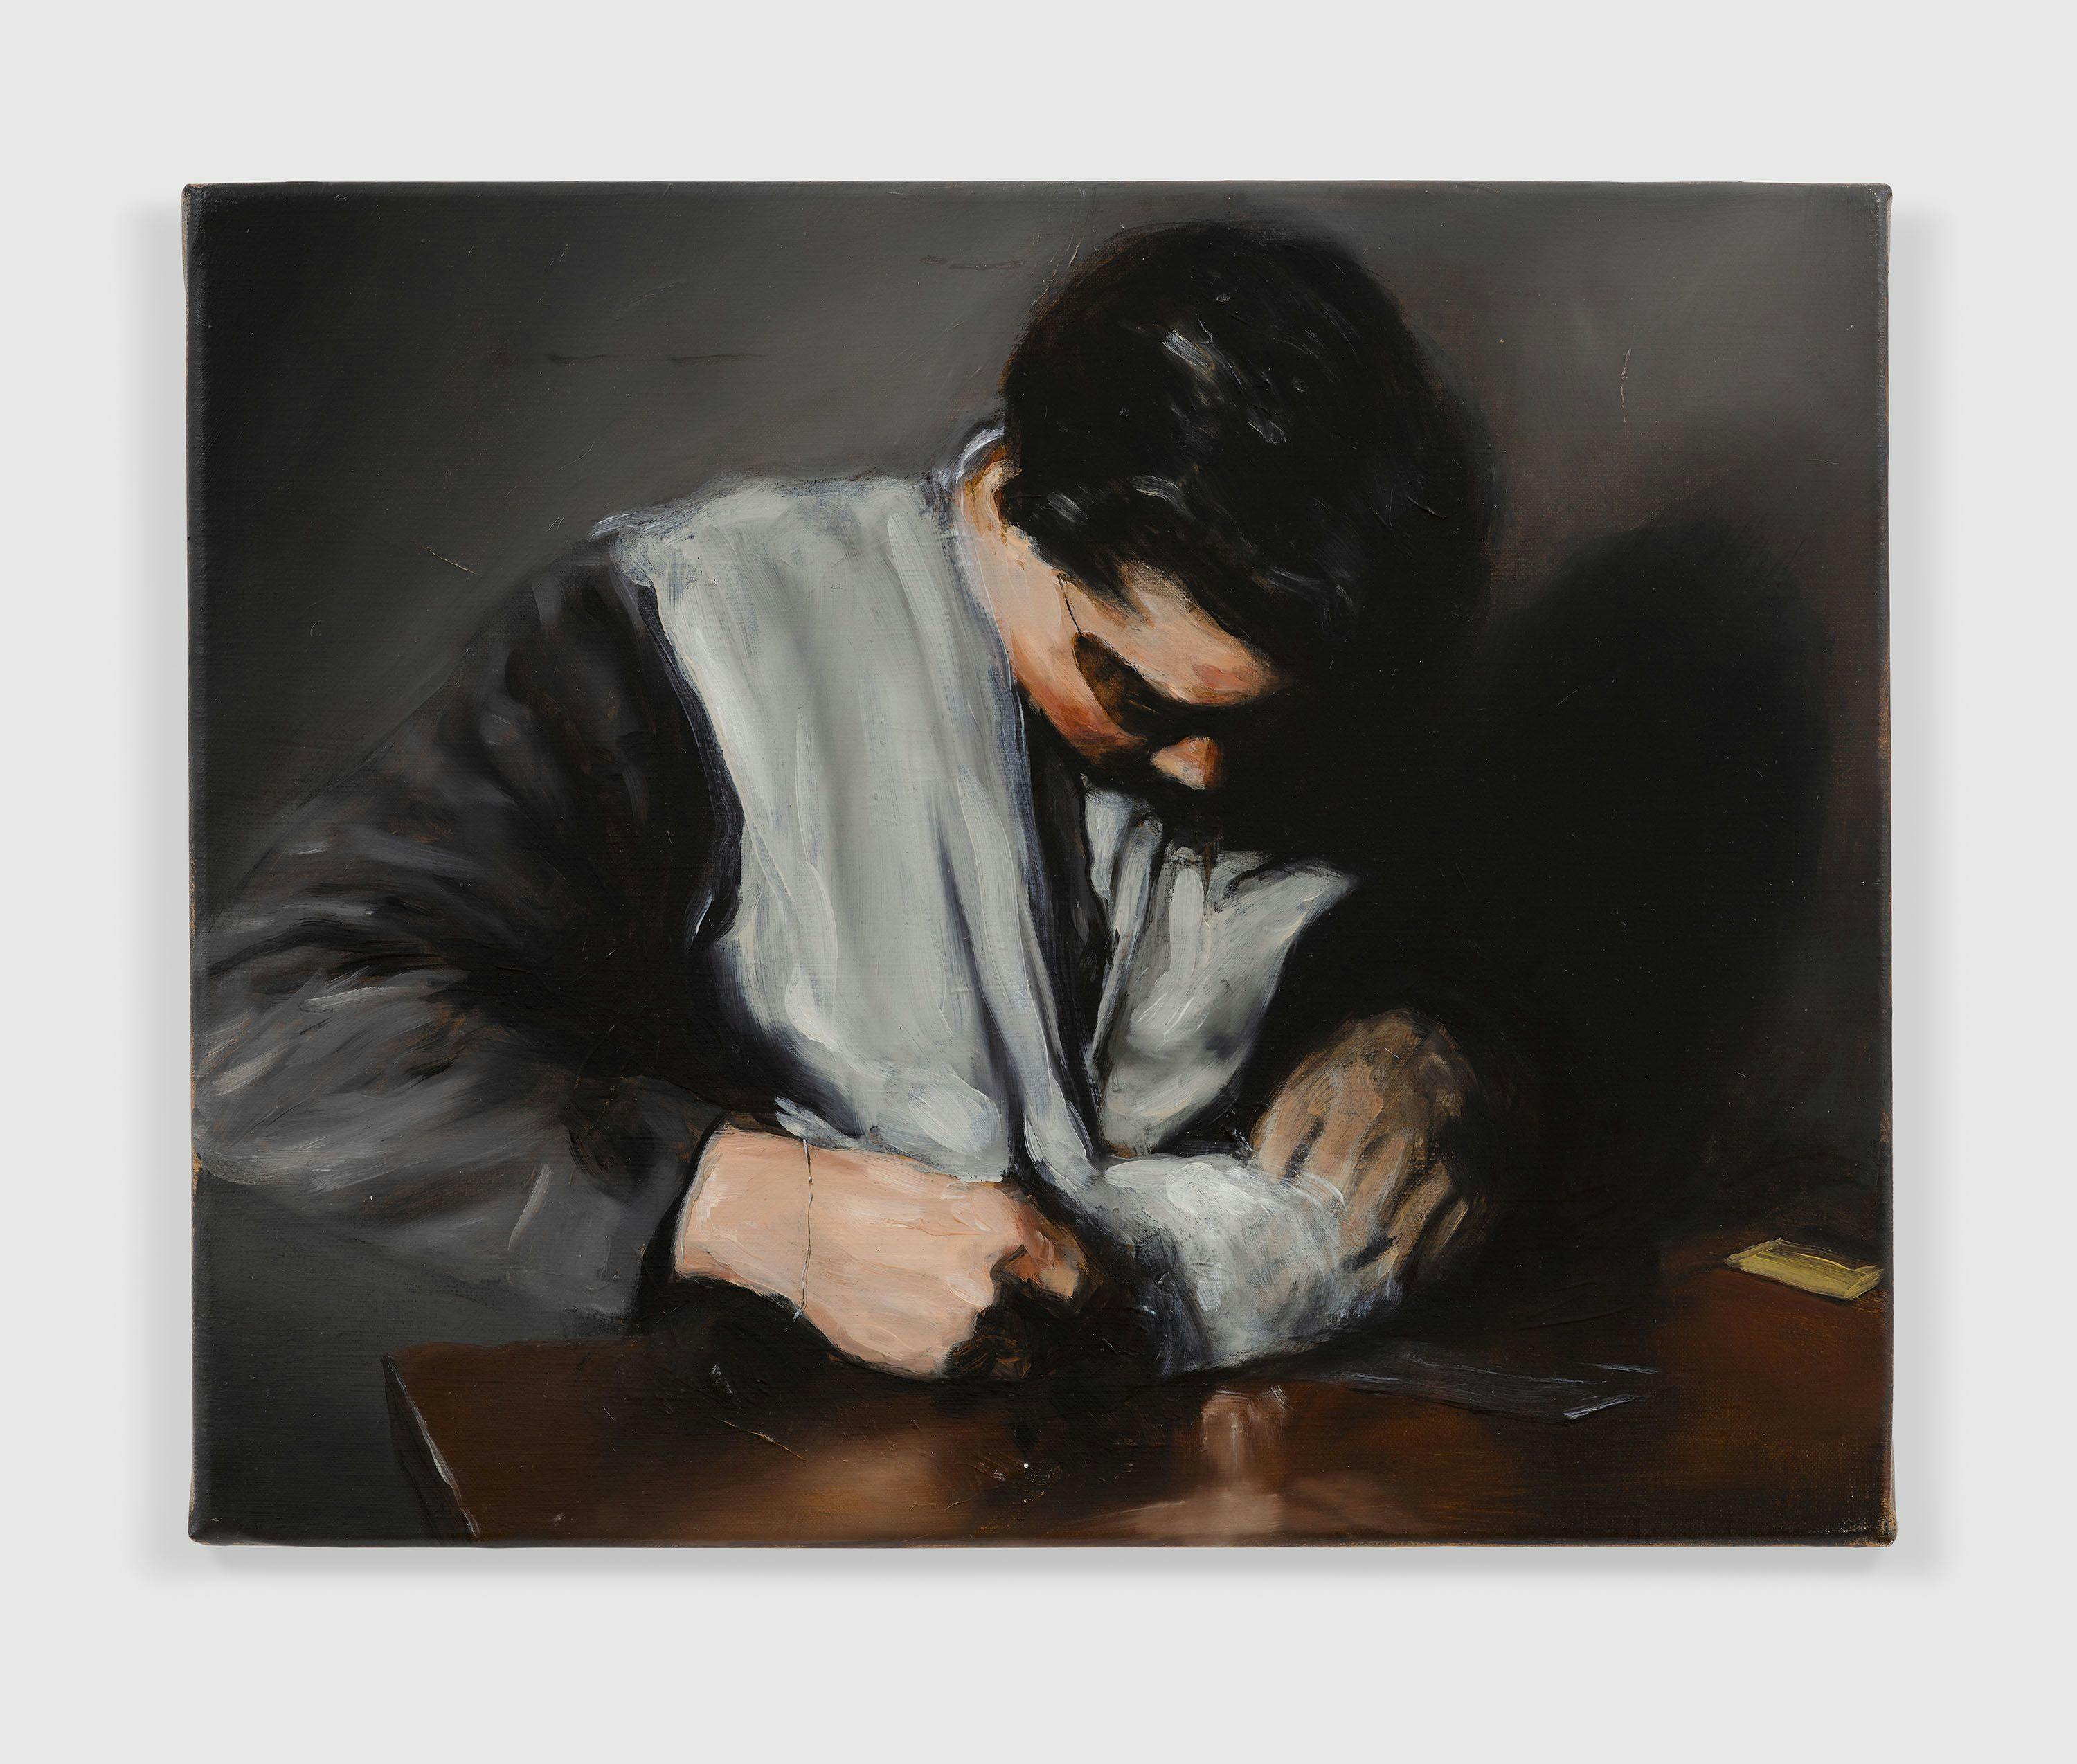 An oil on canvas painting by Michaël Borremans, titled The Villain, dated 2013.